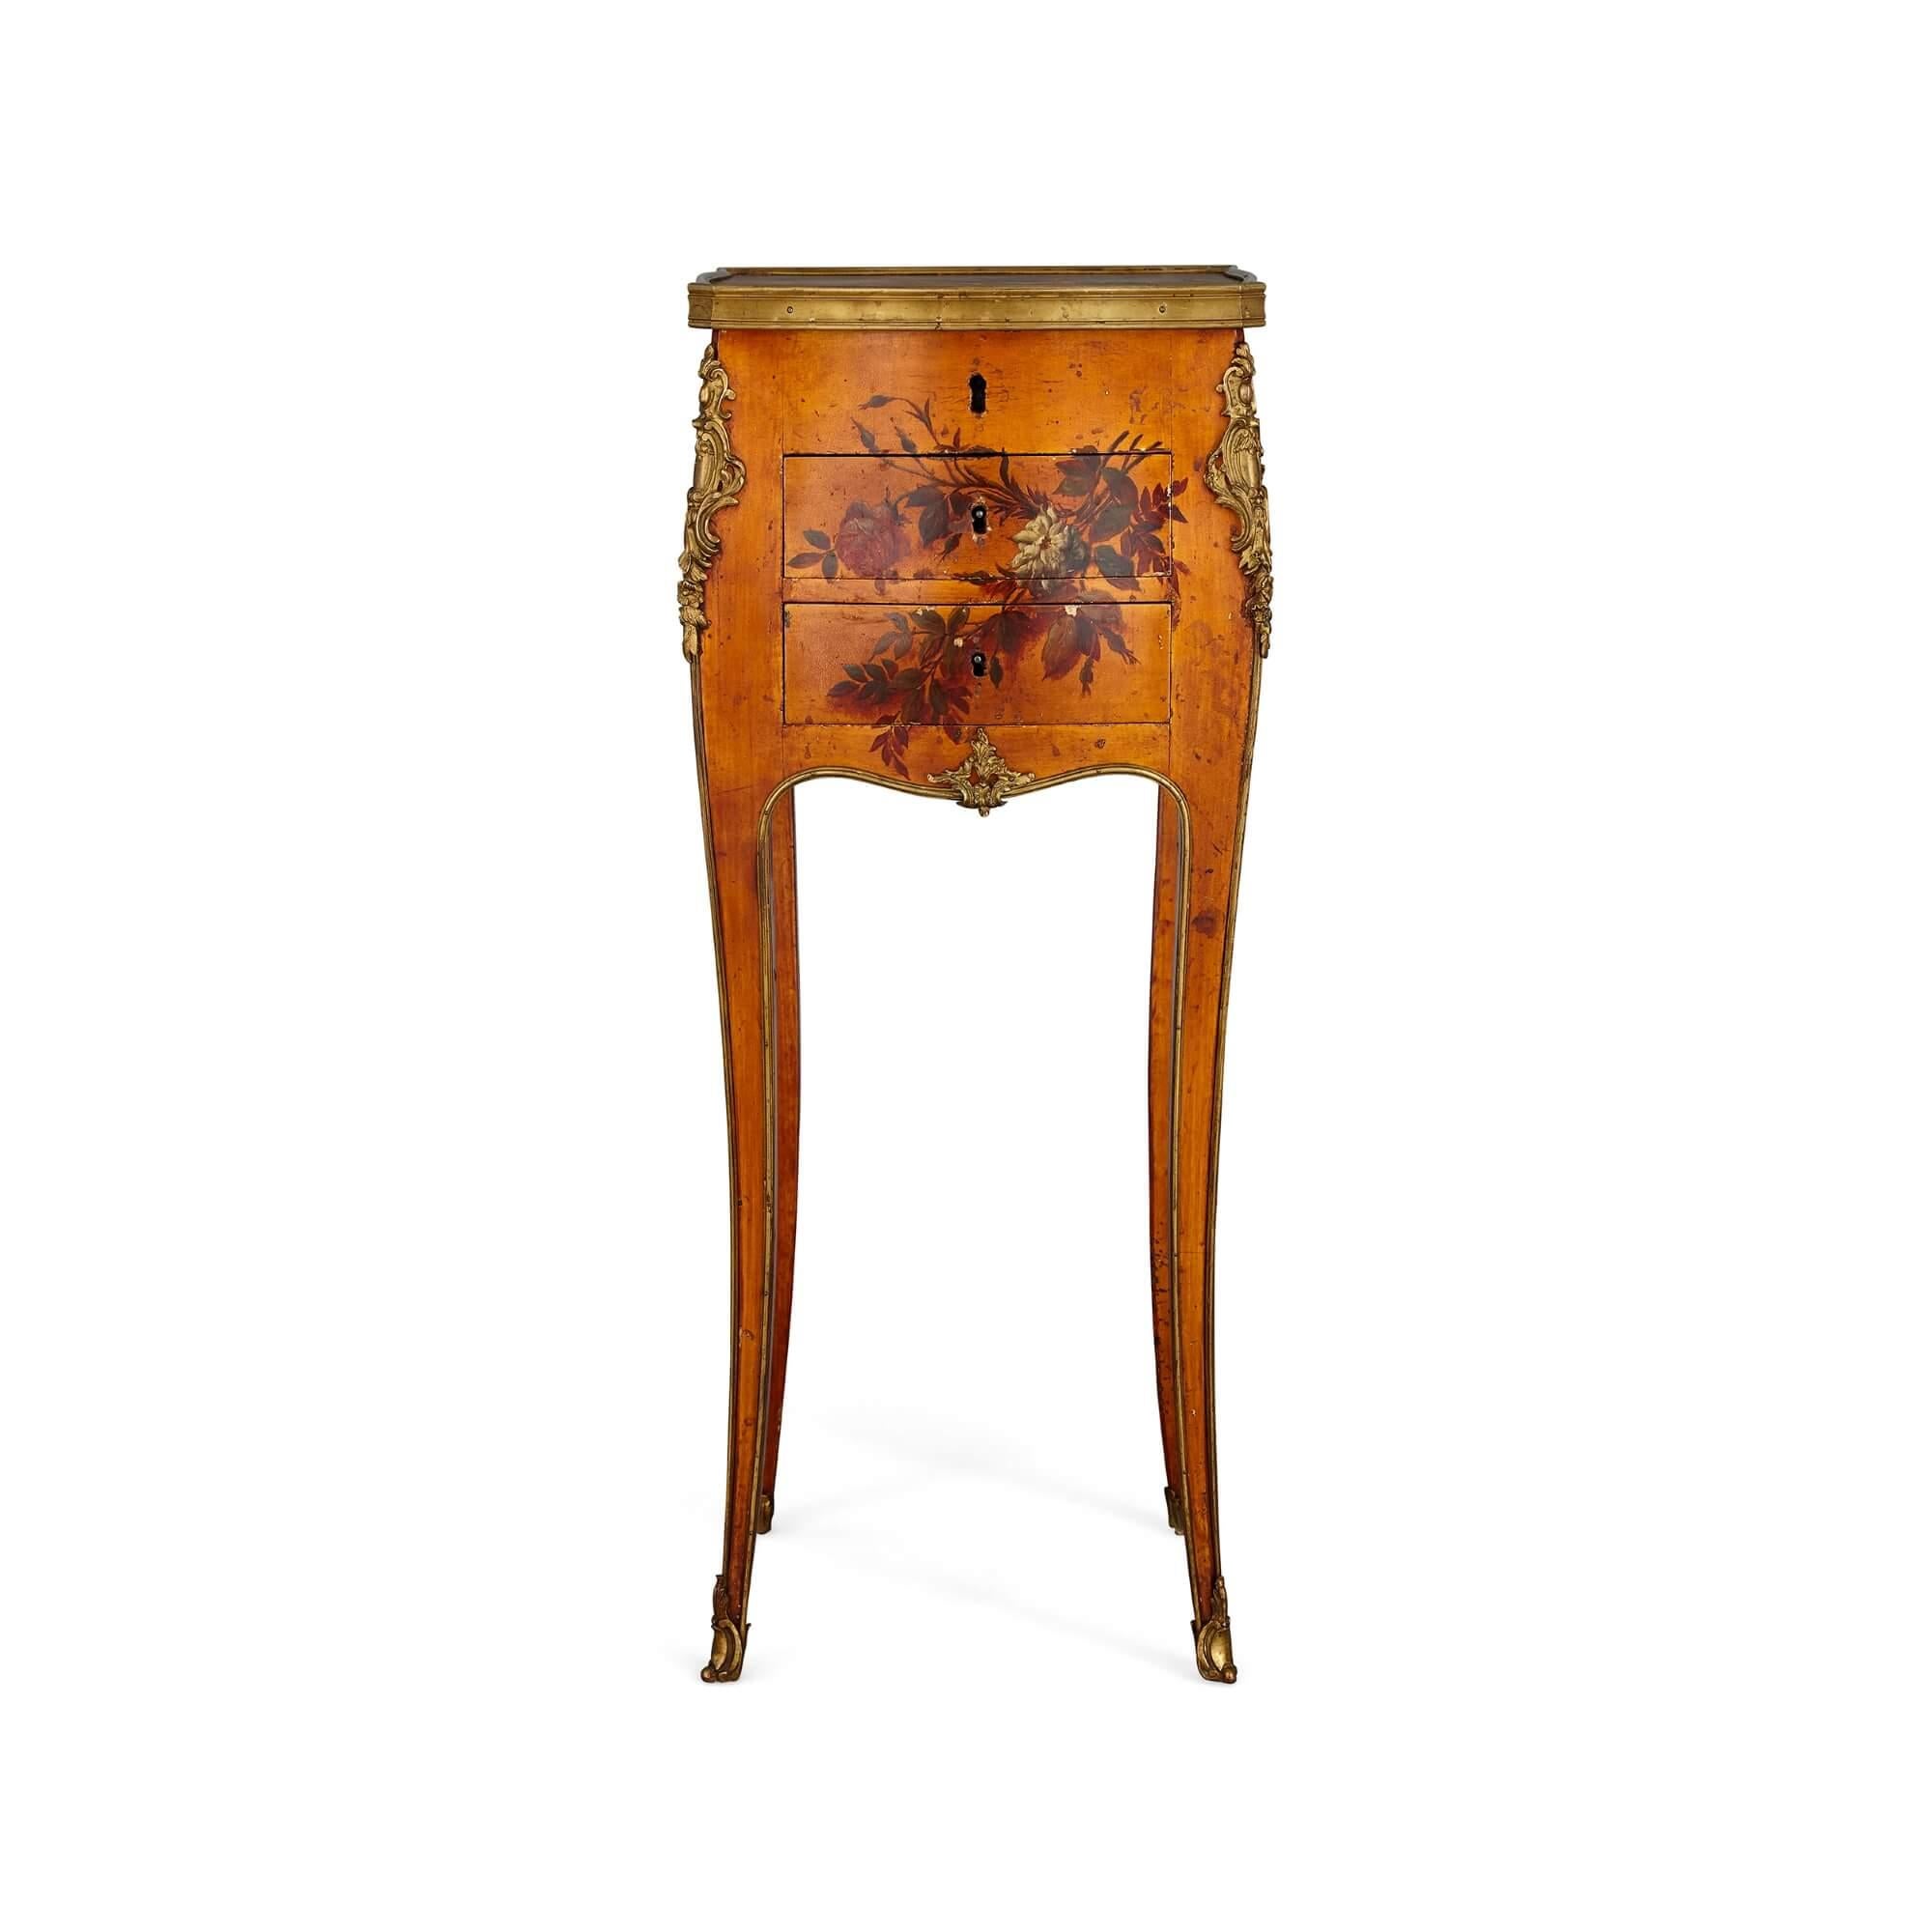 Antique gilt bronze mounted French side table
French, c. 1900
Height 74cm, width 30cm, depth 30cm

This refined and elegant side table is set on four, slender cabriole legs with hoof feet mounted with gilt bronze. The table features a slight bombé